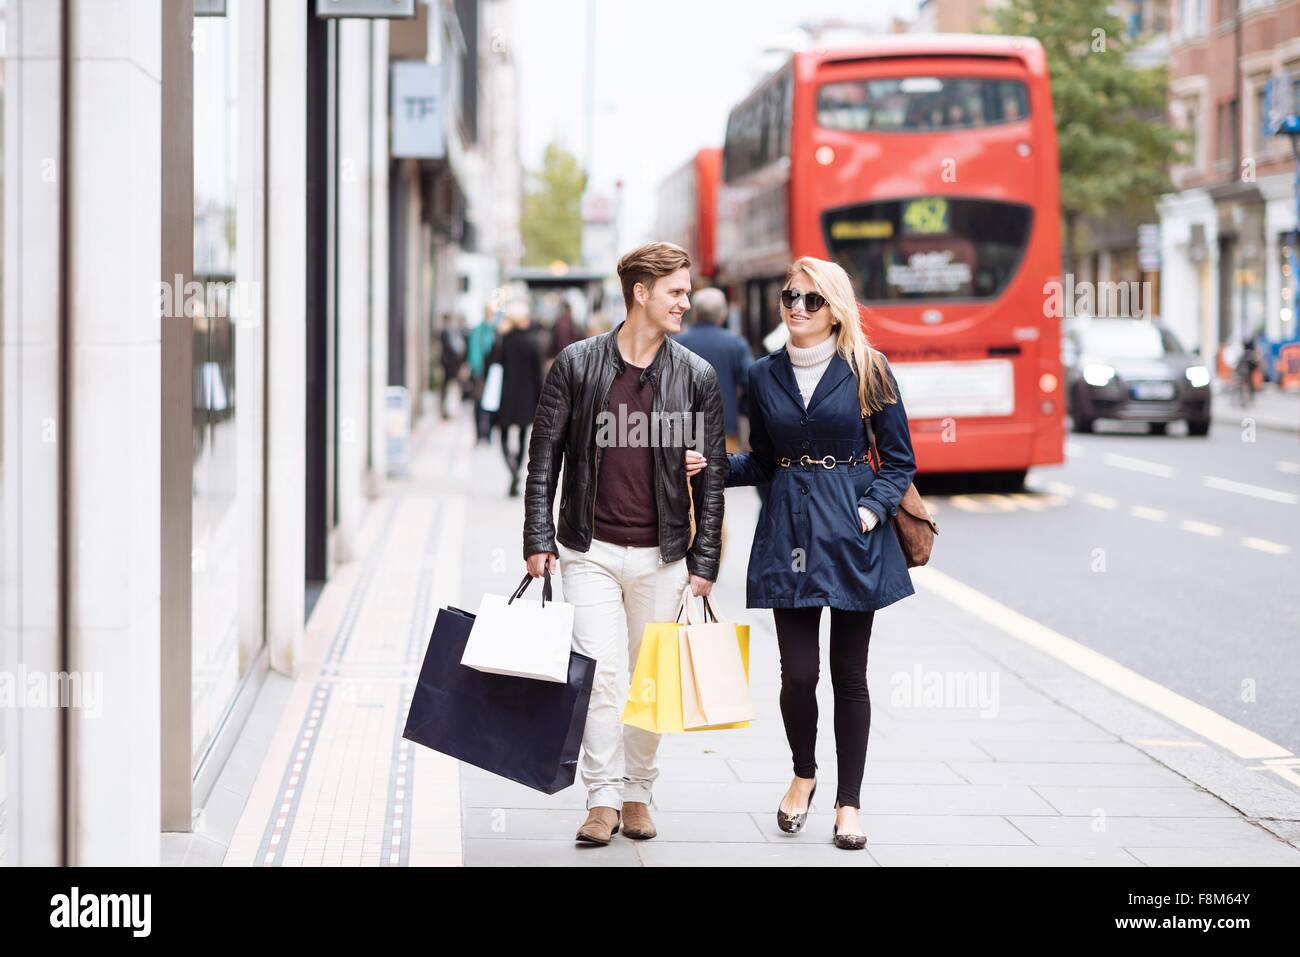 Young couple with shopping bags strolling, London, England, UK Stock Photo